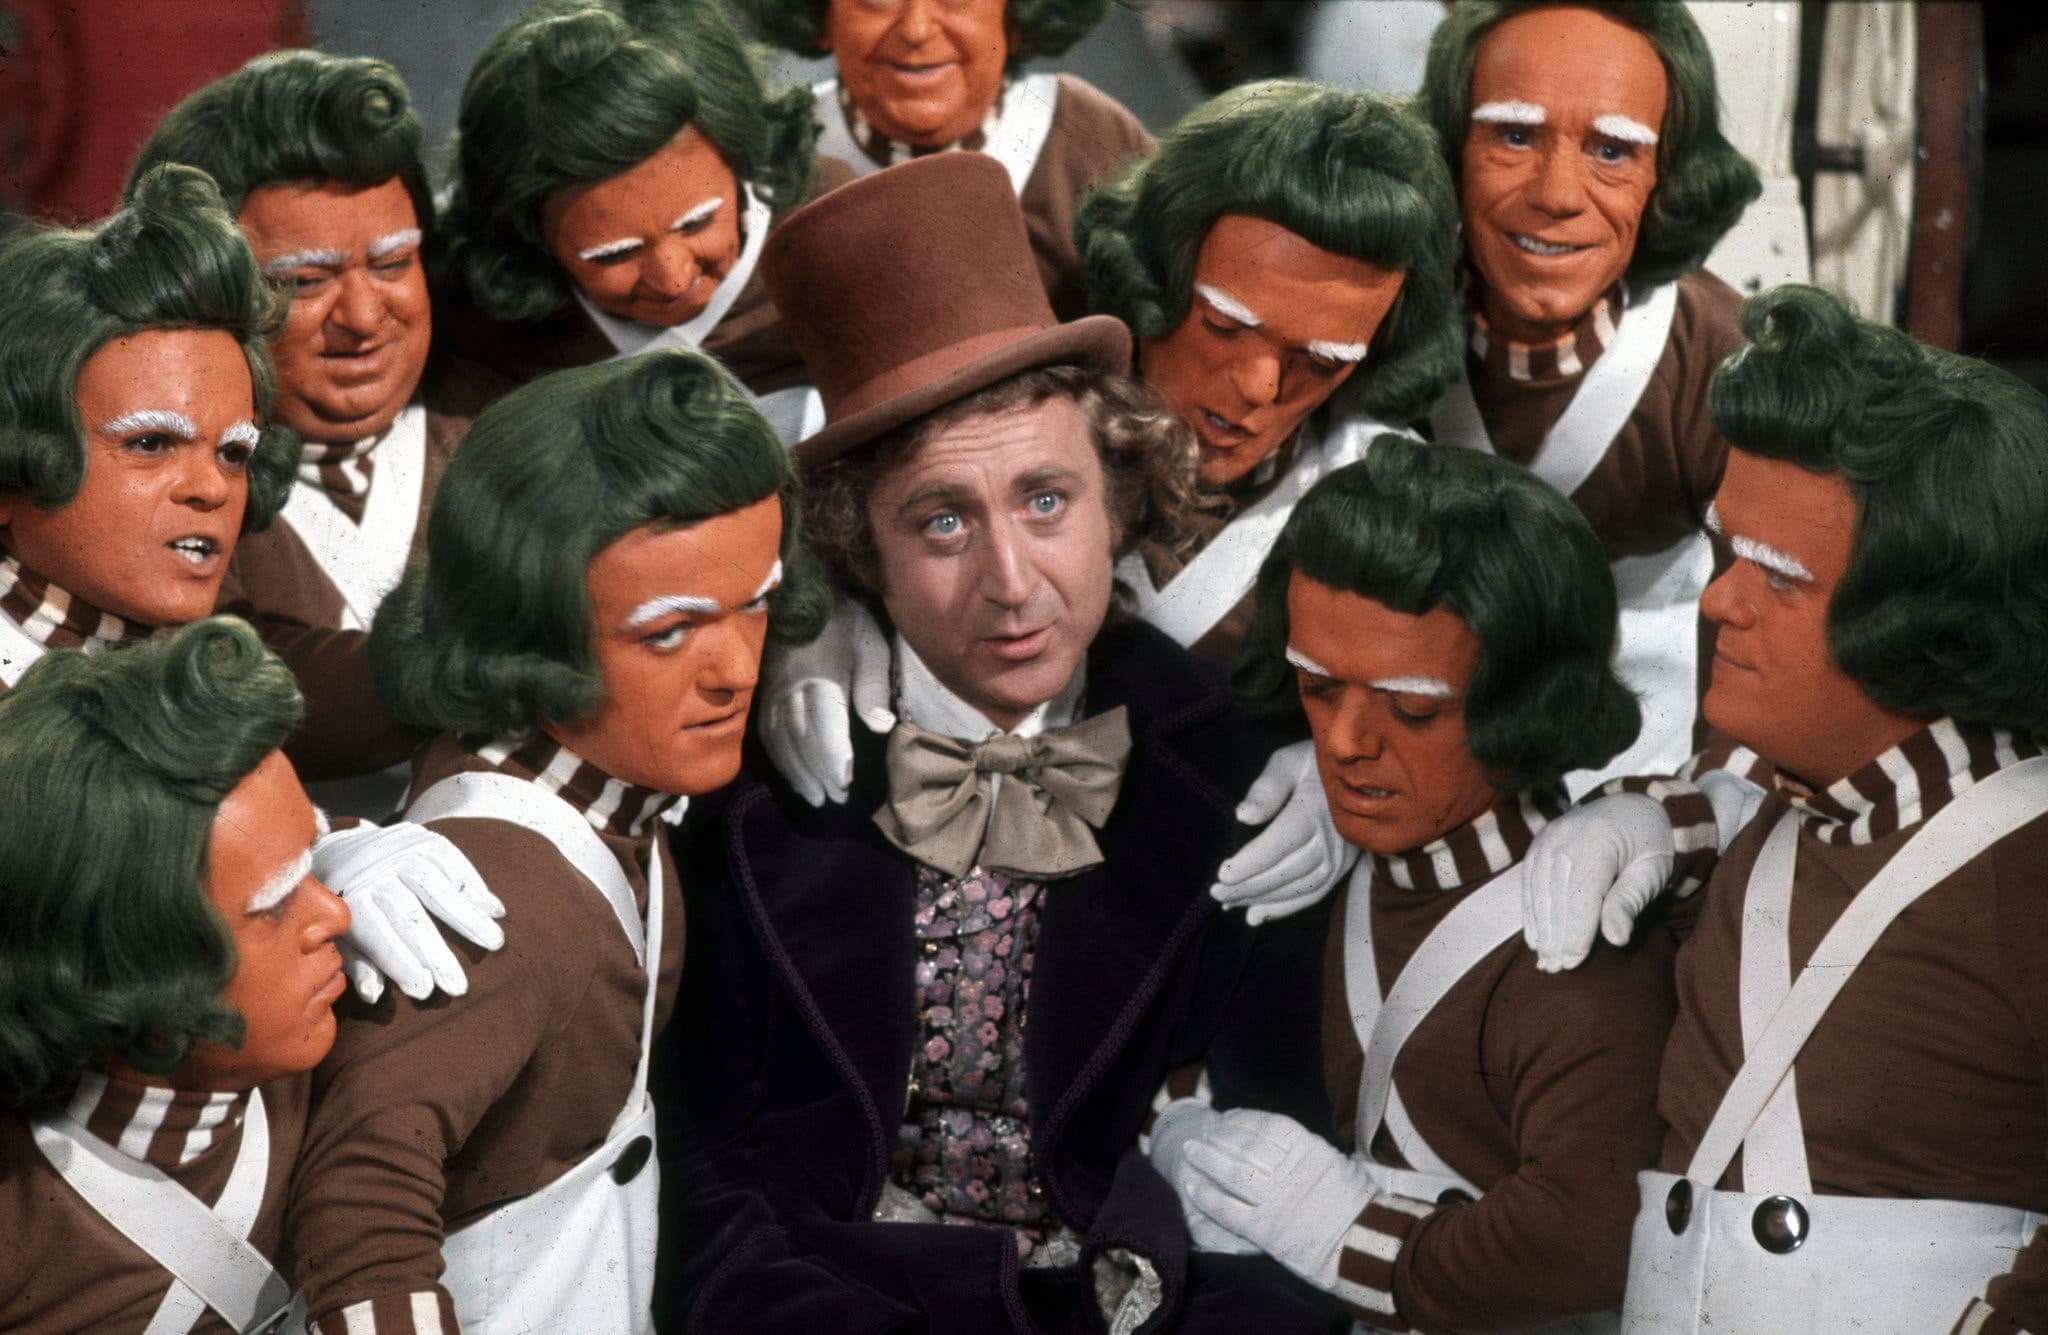 Gene Wilder in Willy Wonka and the Chocolate Factory film